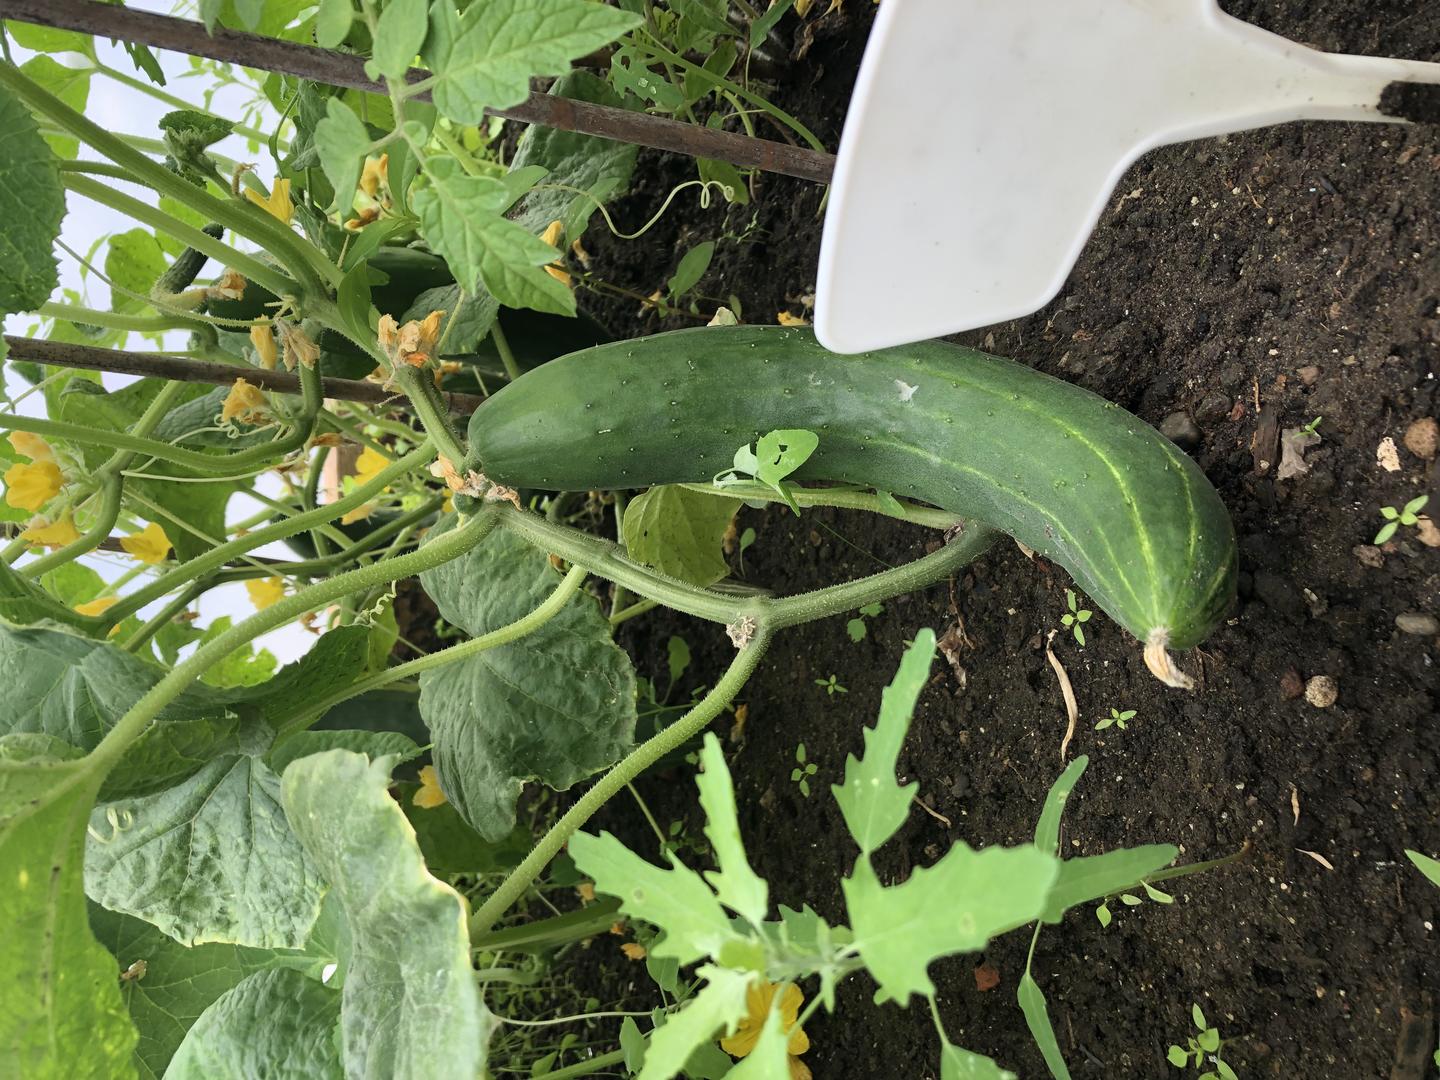 Cucumber grown within the community garden